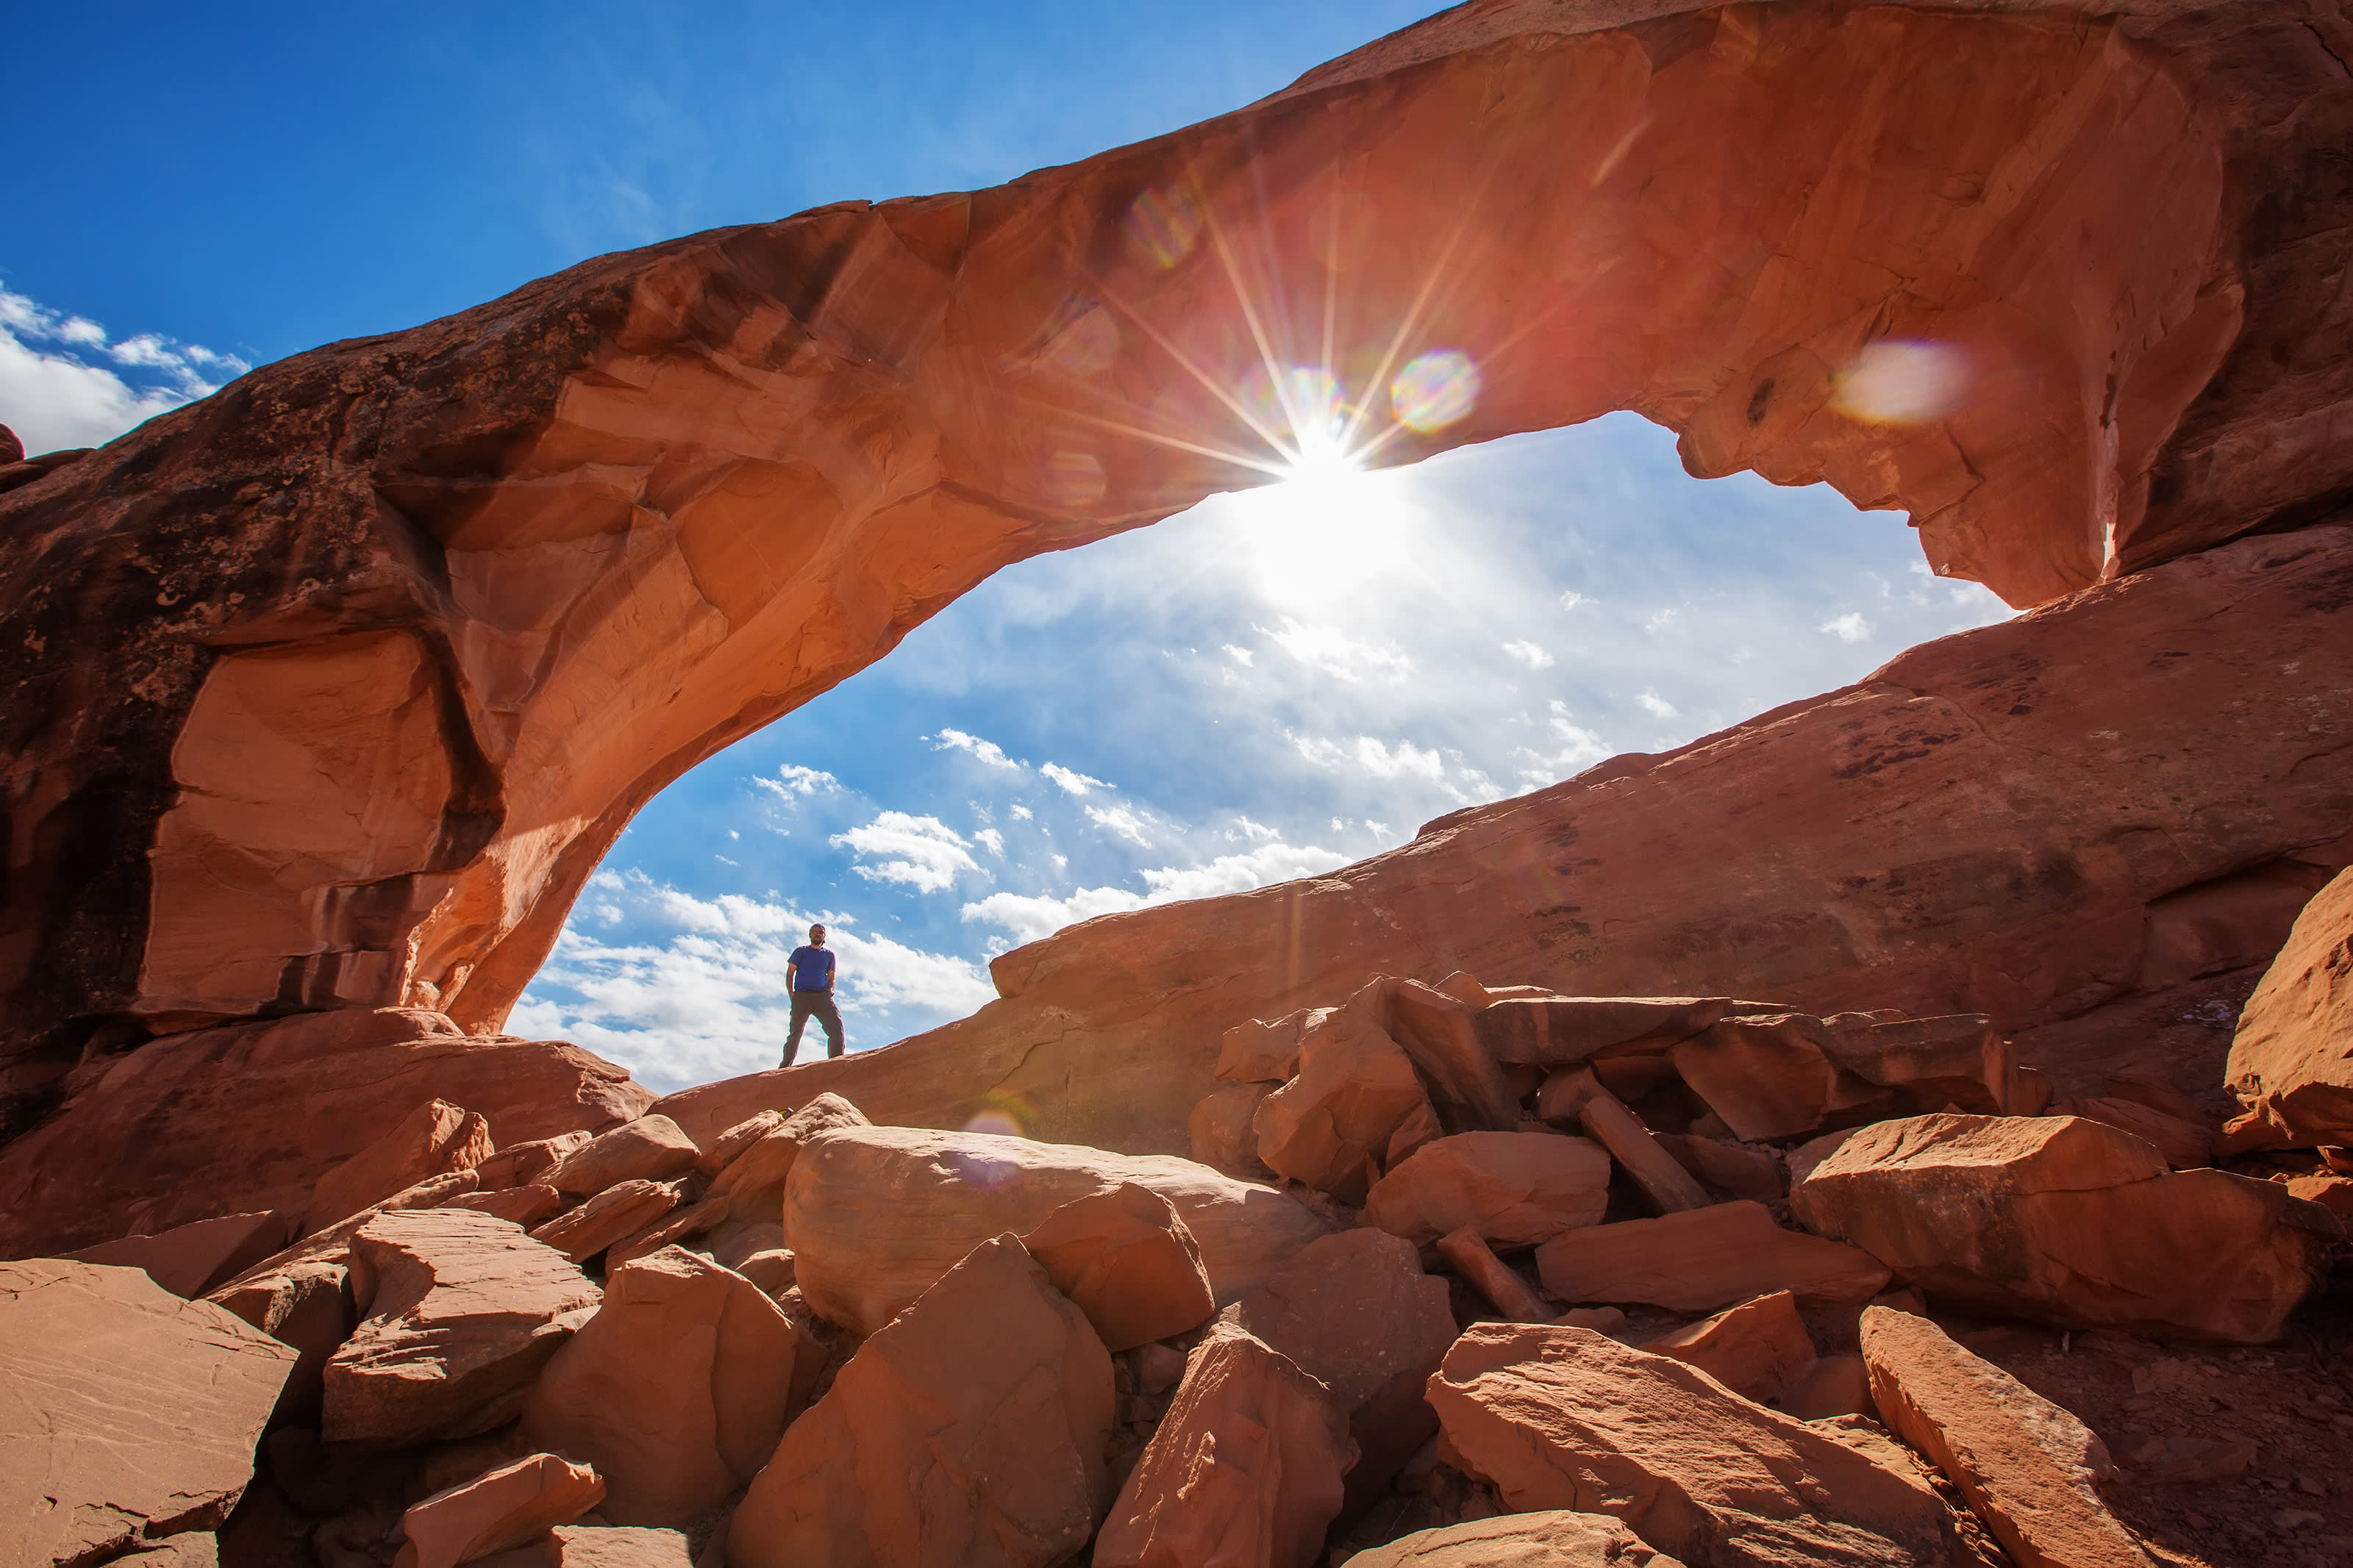 Test image - Guy hiking in Arches